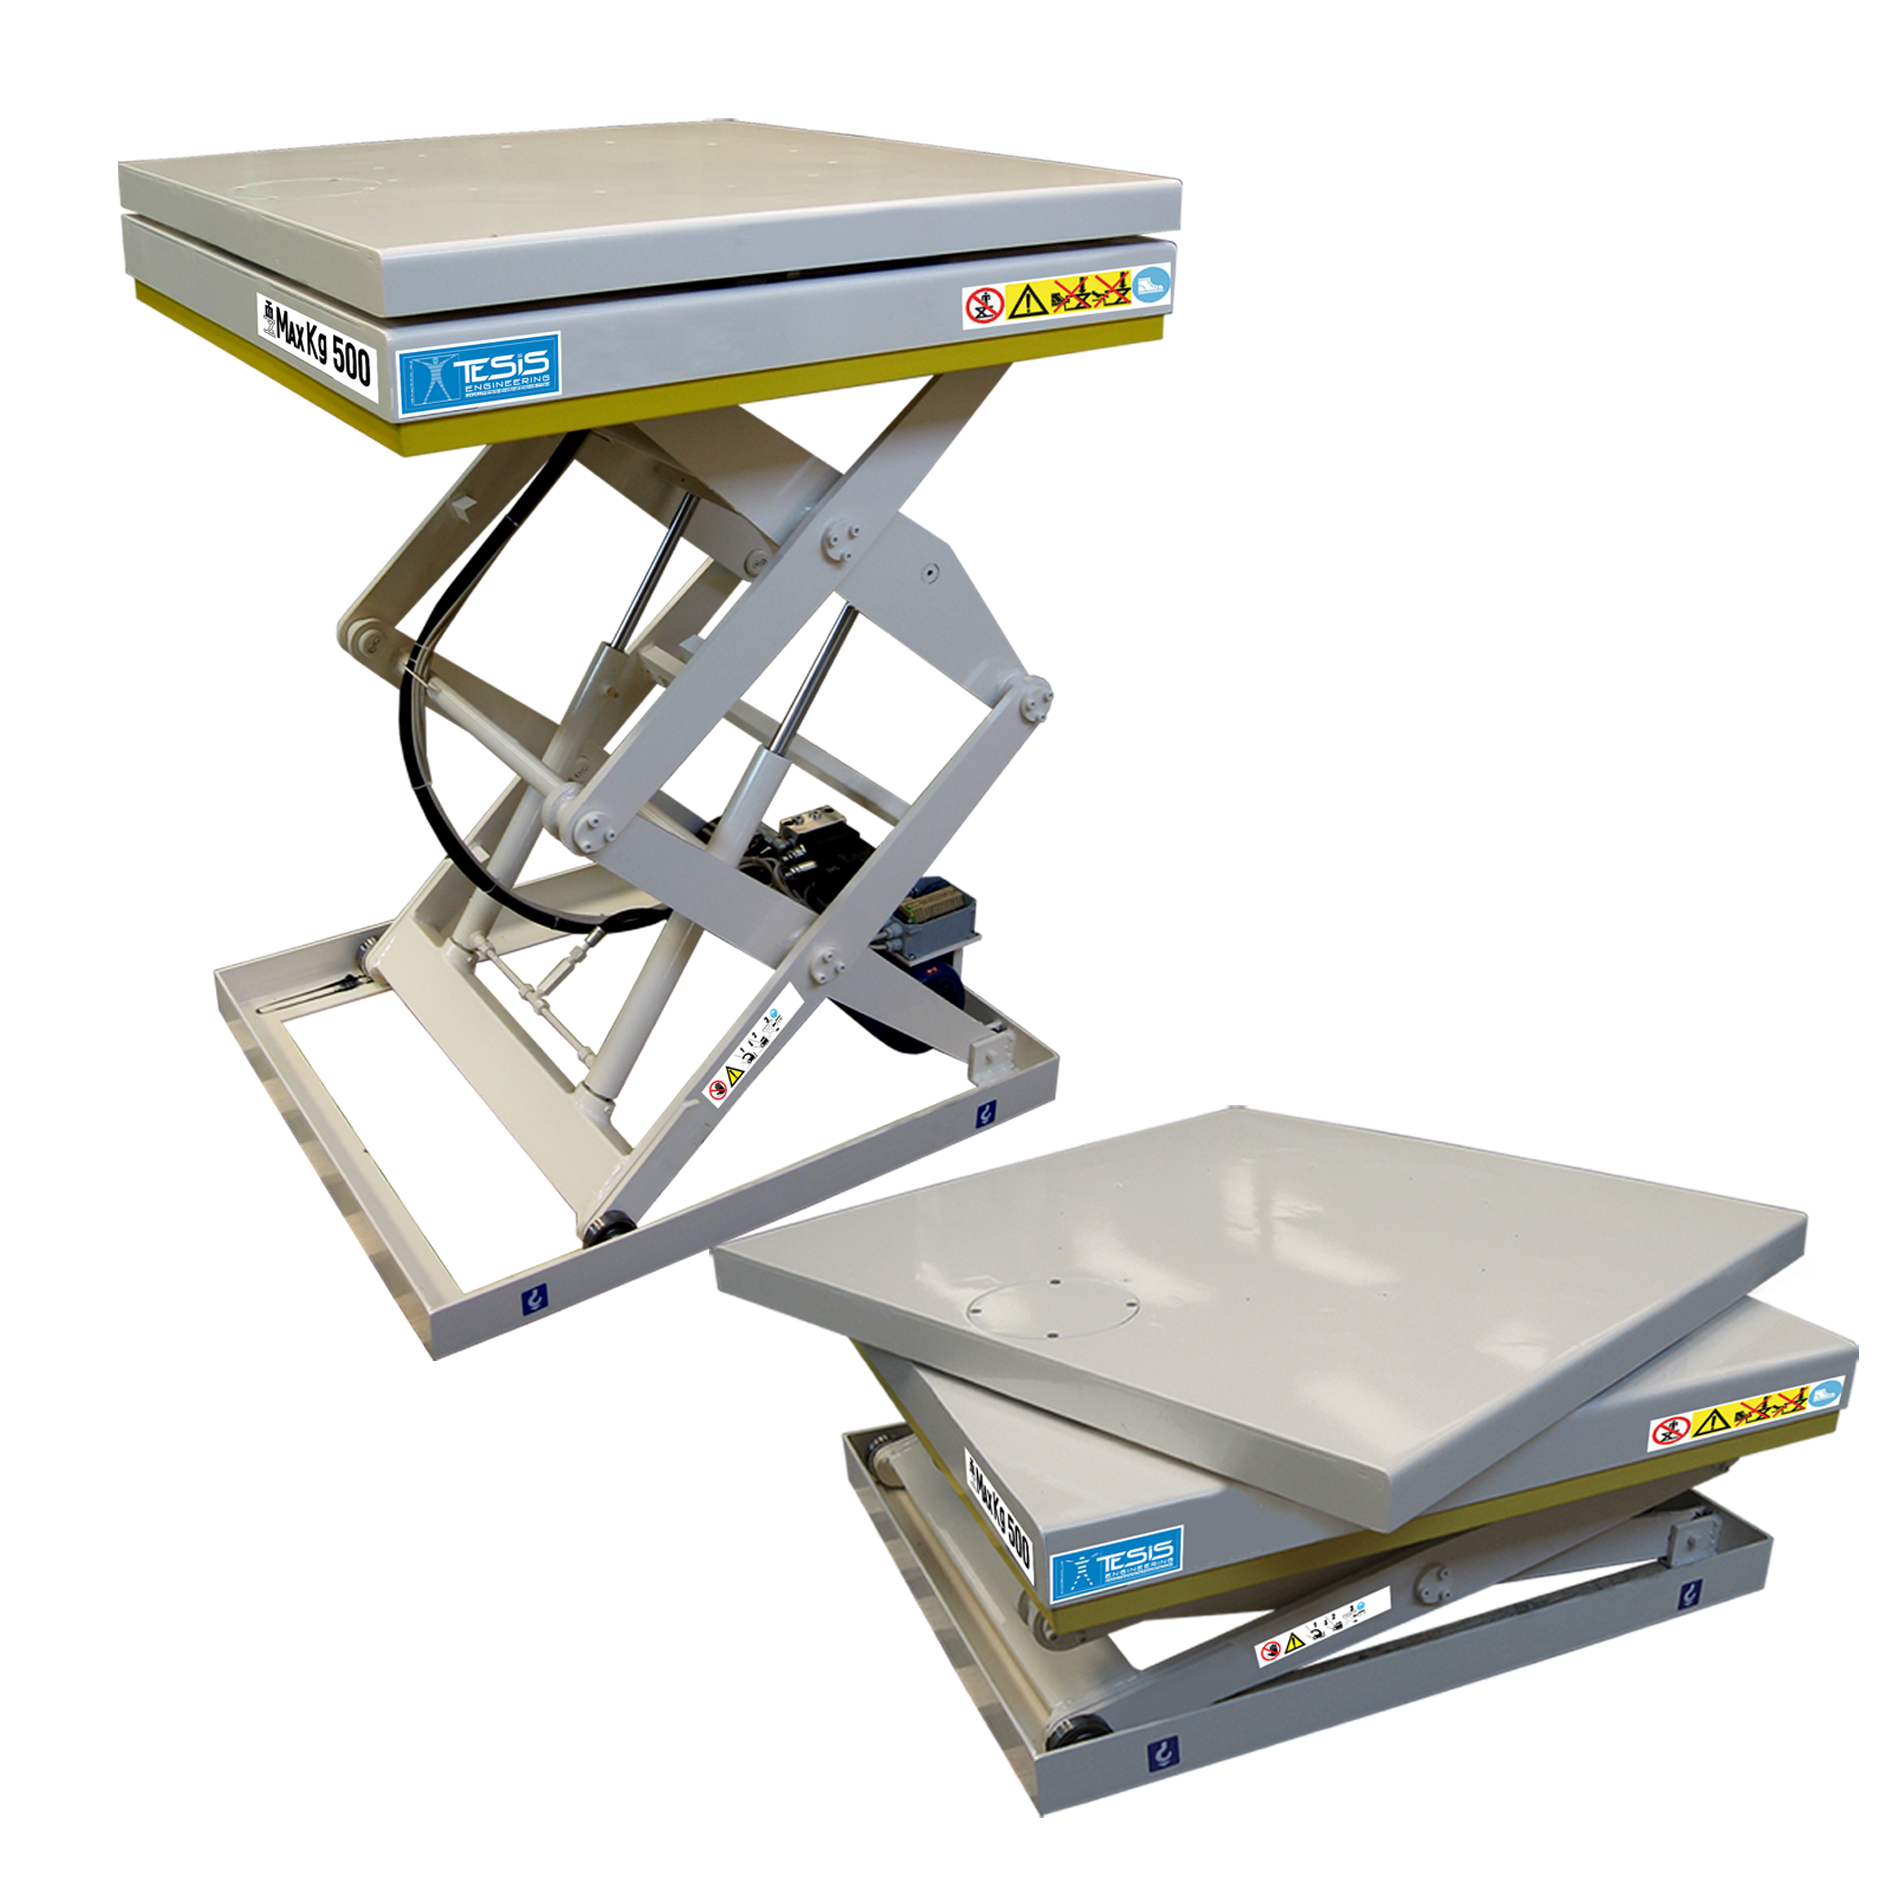 Lifting table with motorized turning top platform - lift tables with continuous rotation of the platform - turning lifting tables - turntable scissor lifts